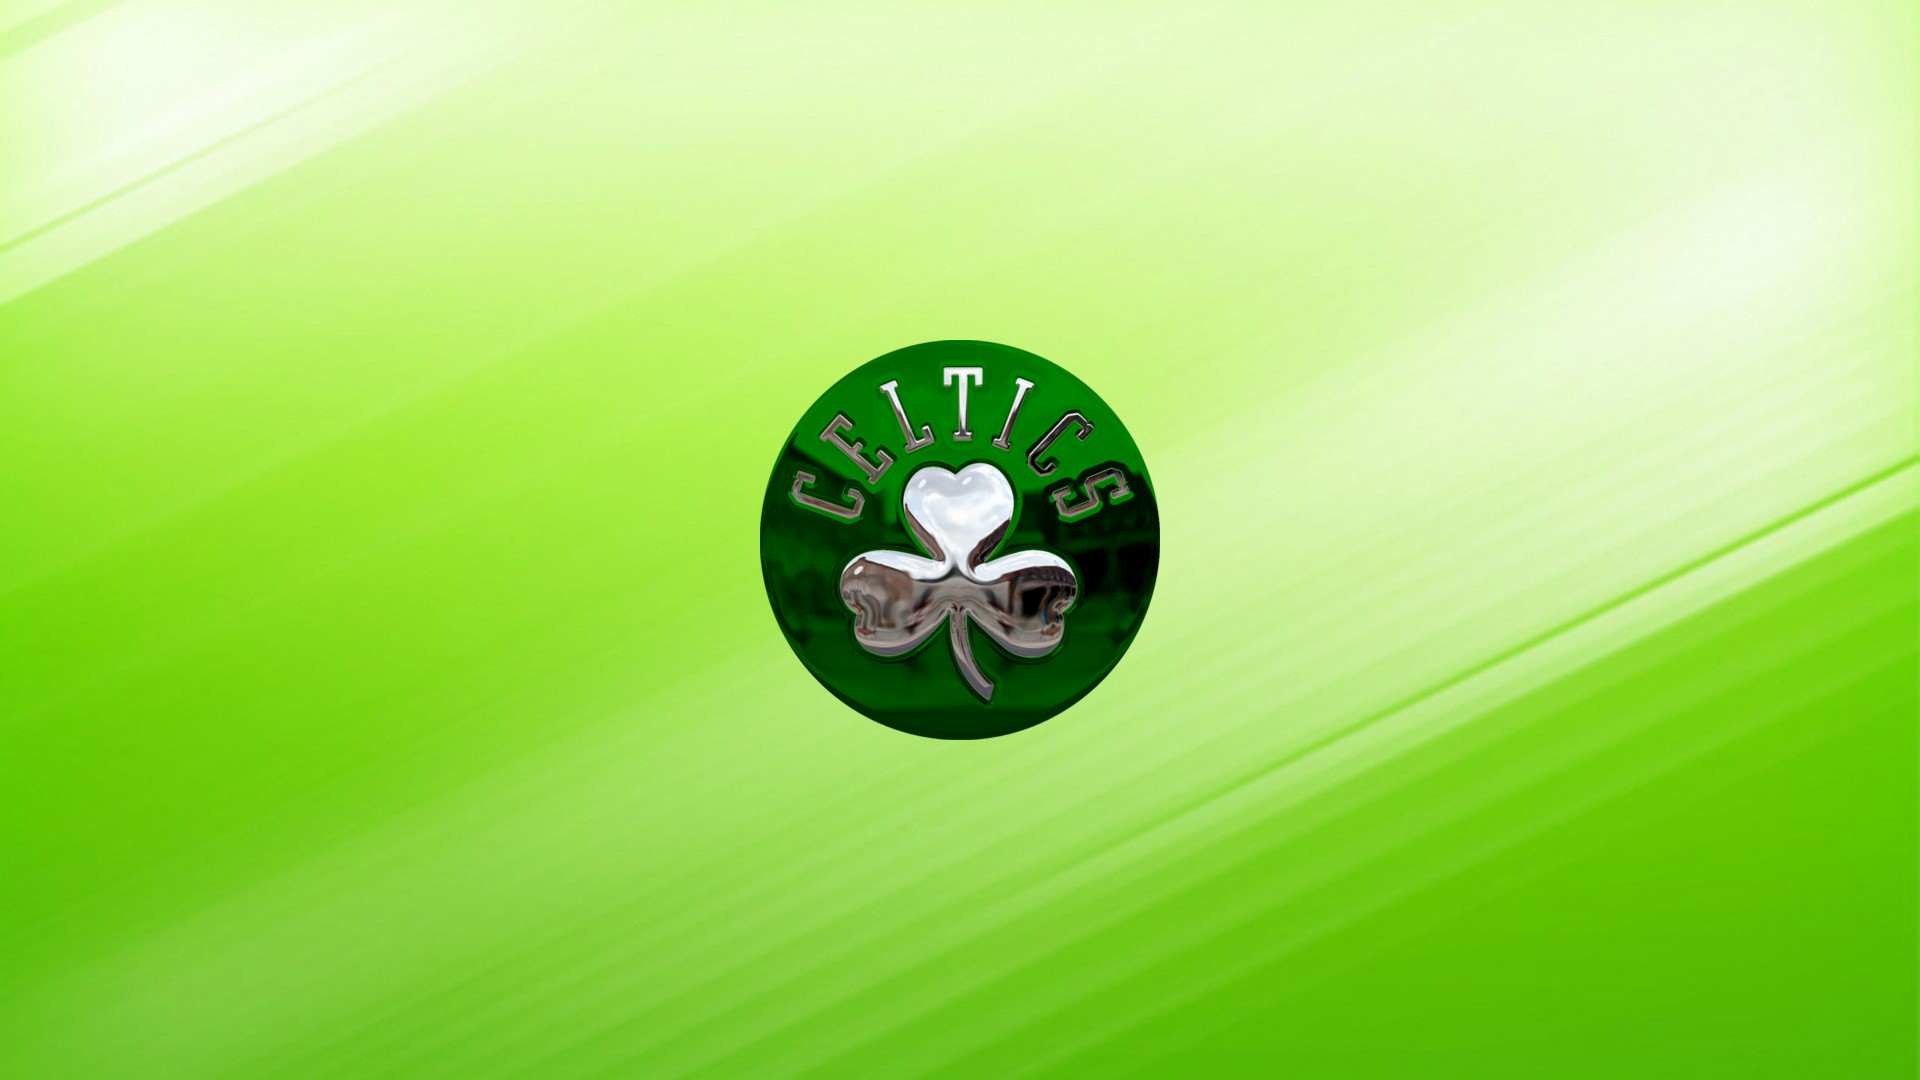 Wallpapers HD Boston Celtics with image dimensions 1920x1080 pixel. You can make this wallpaper for your Desktop Computer Backgrounds, Windows or Mac Screensavers, iPhone Lock screen, Tablet or Android and another Mobile Phone device